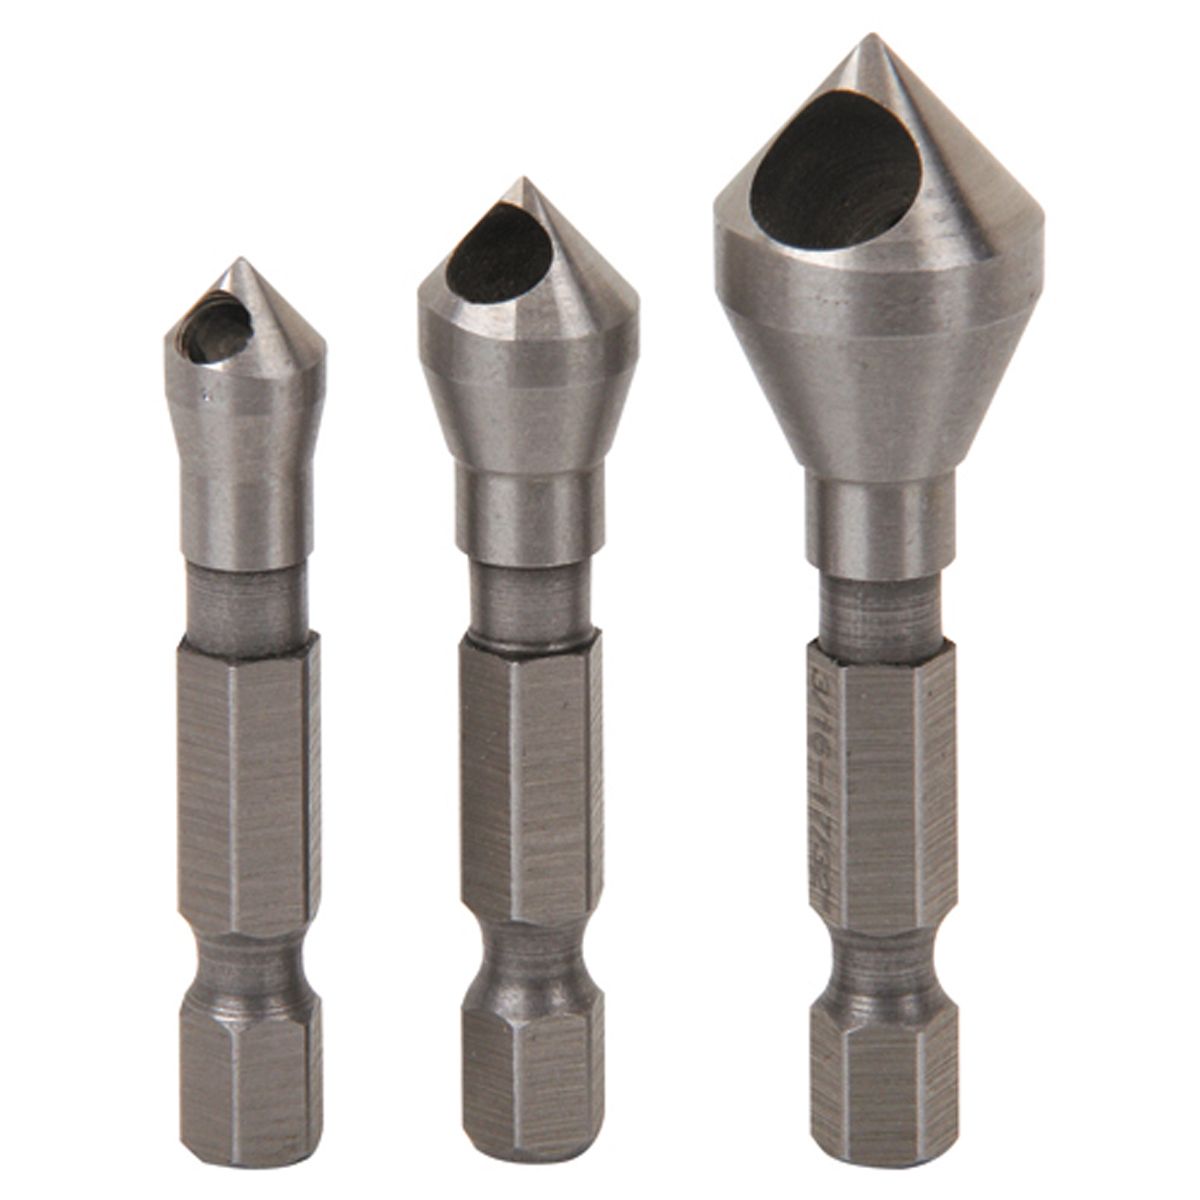 WARRIOR Countersink and Deburring Tool Set, 3 Piece